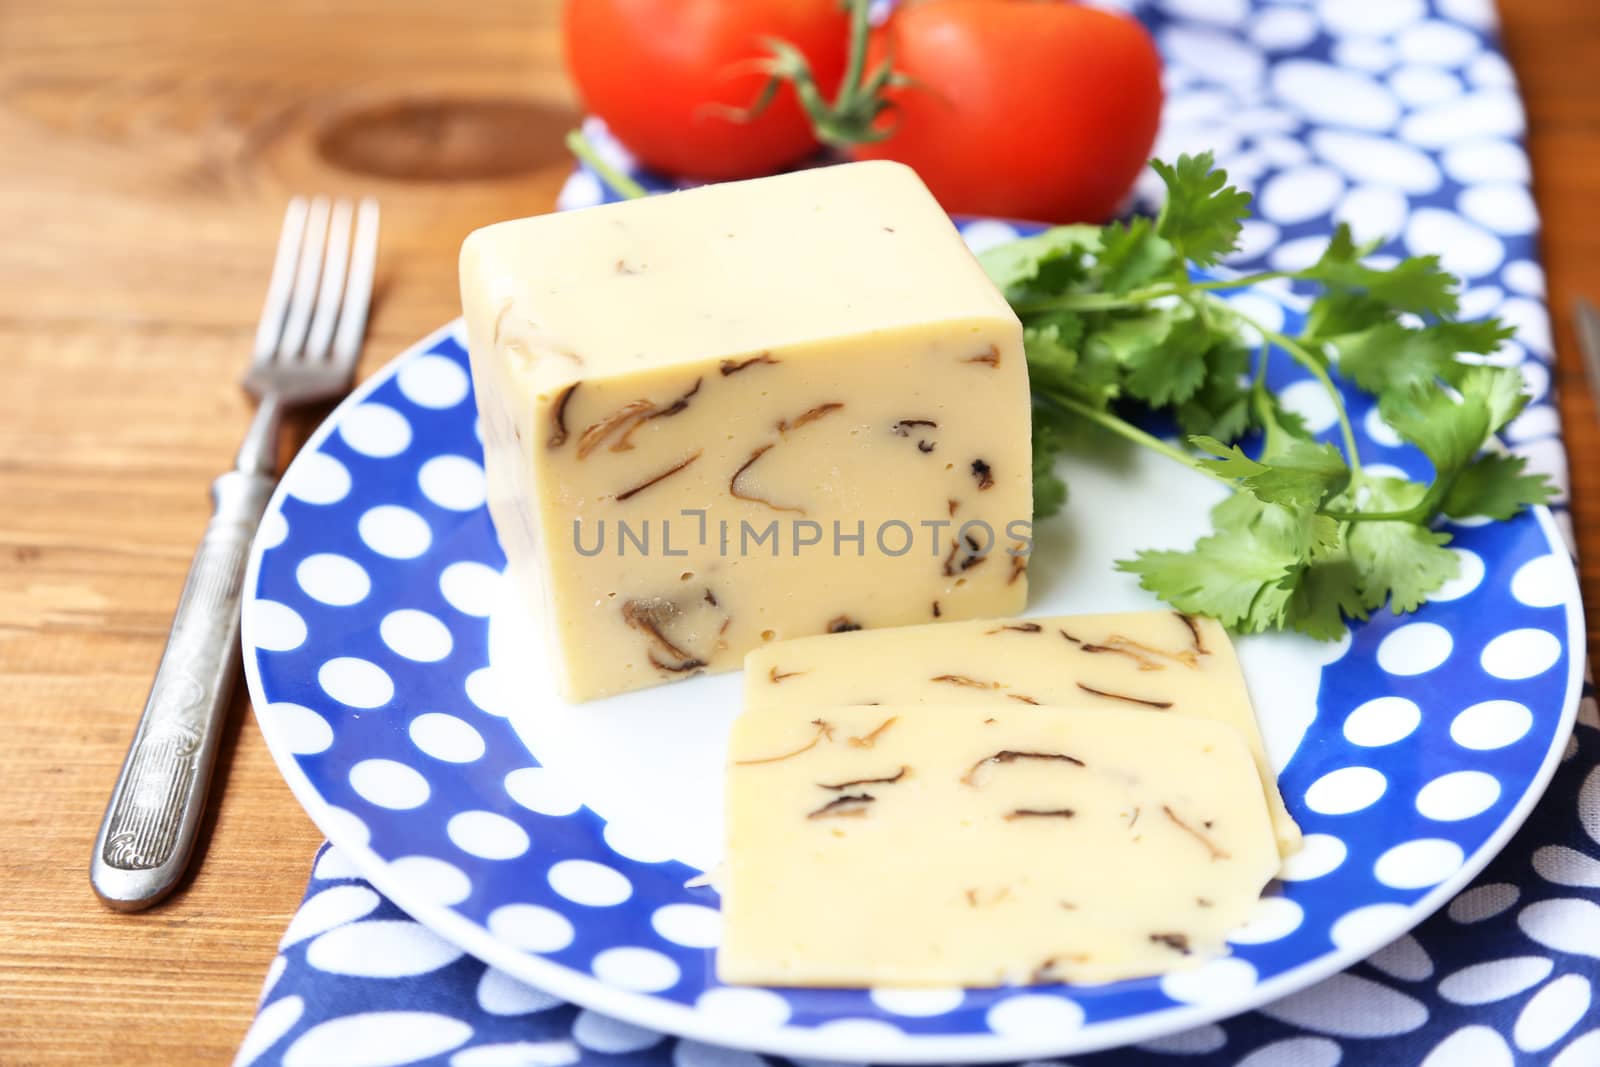 cheese with mushrooms,near the red tomatoes on wooden plate